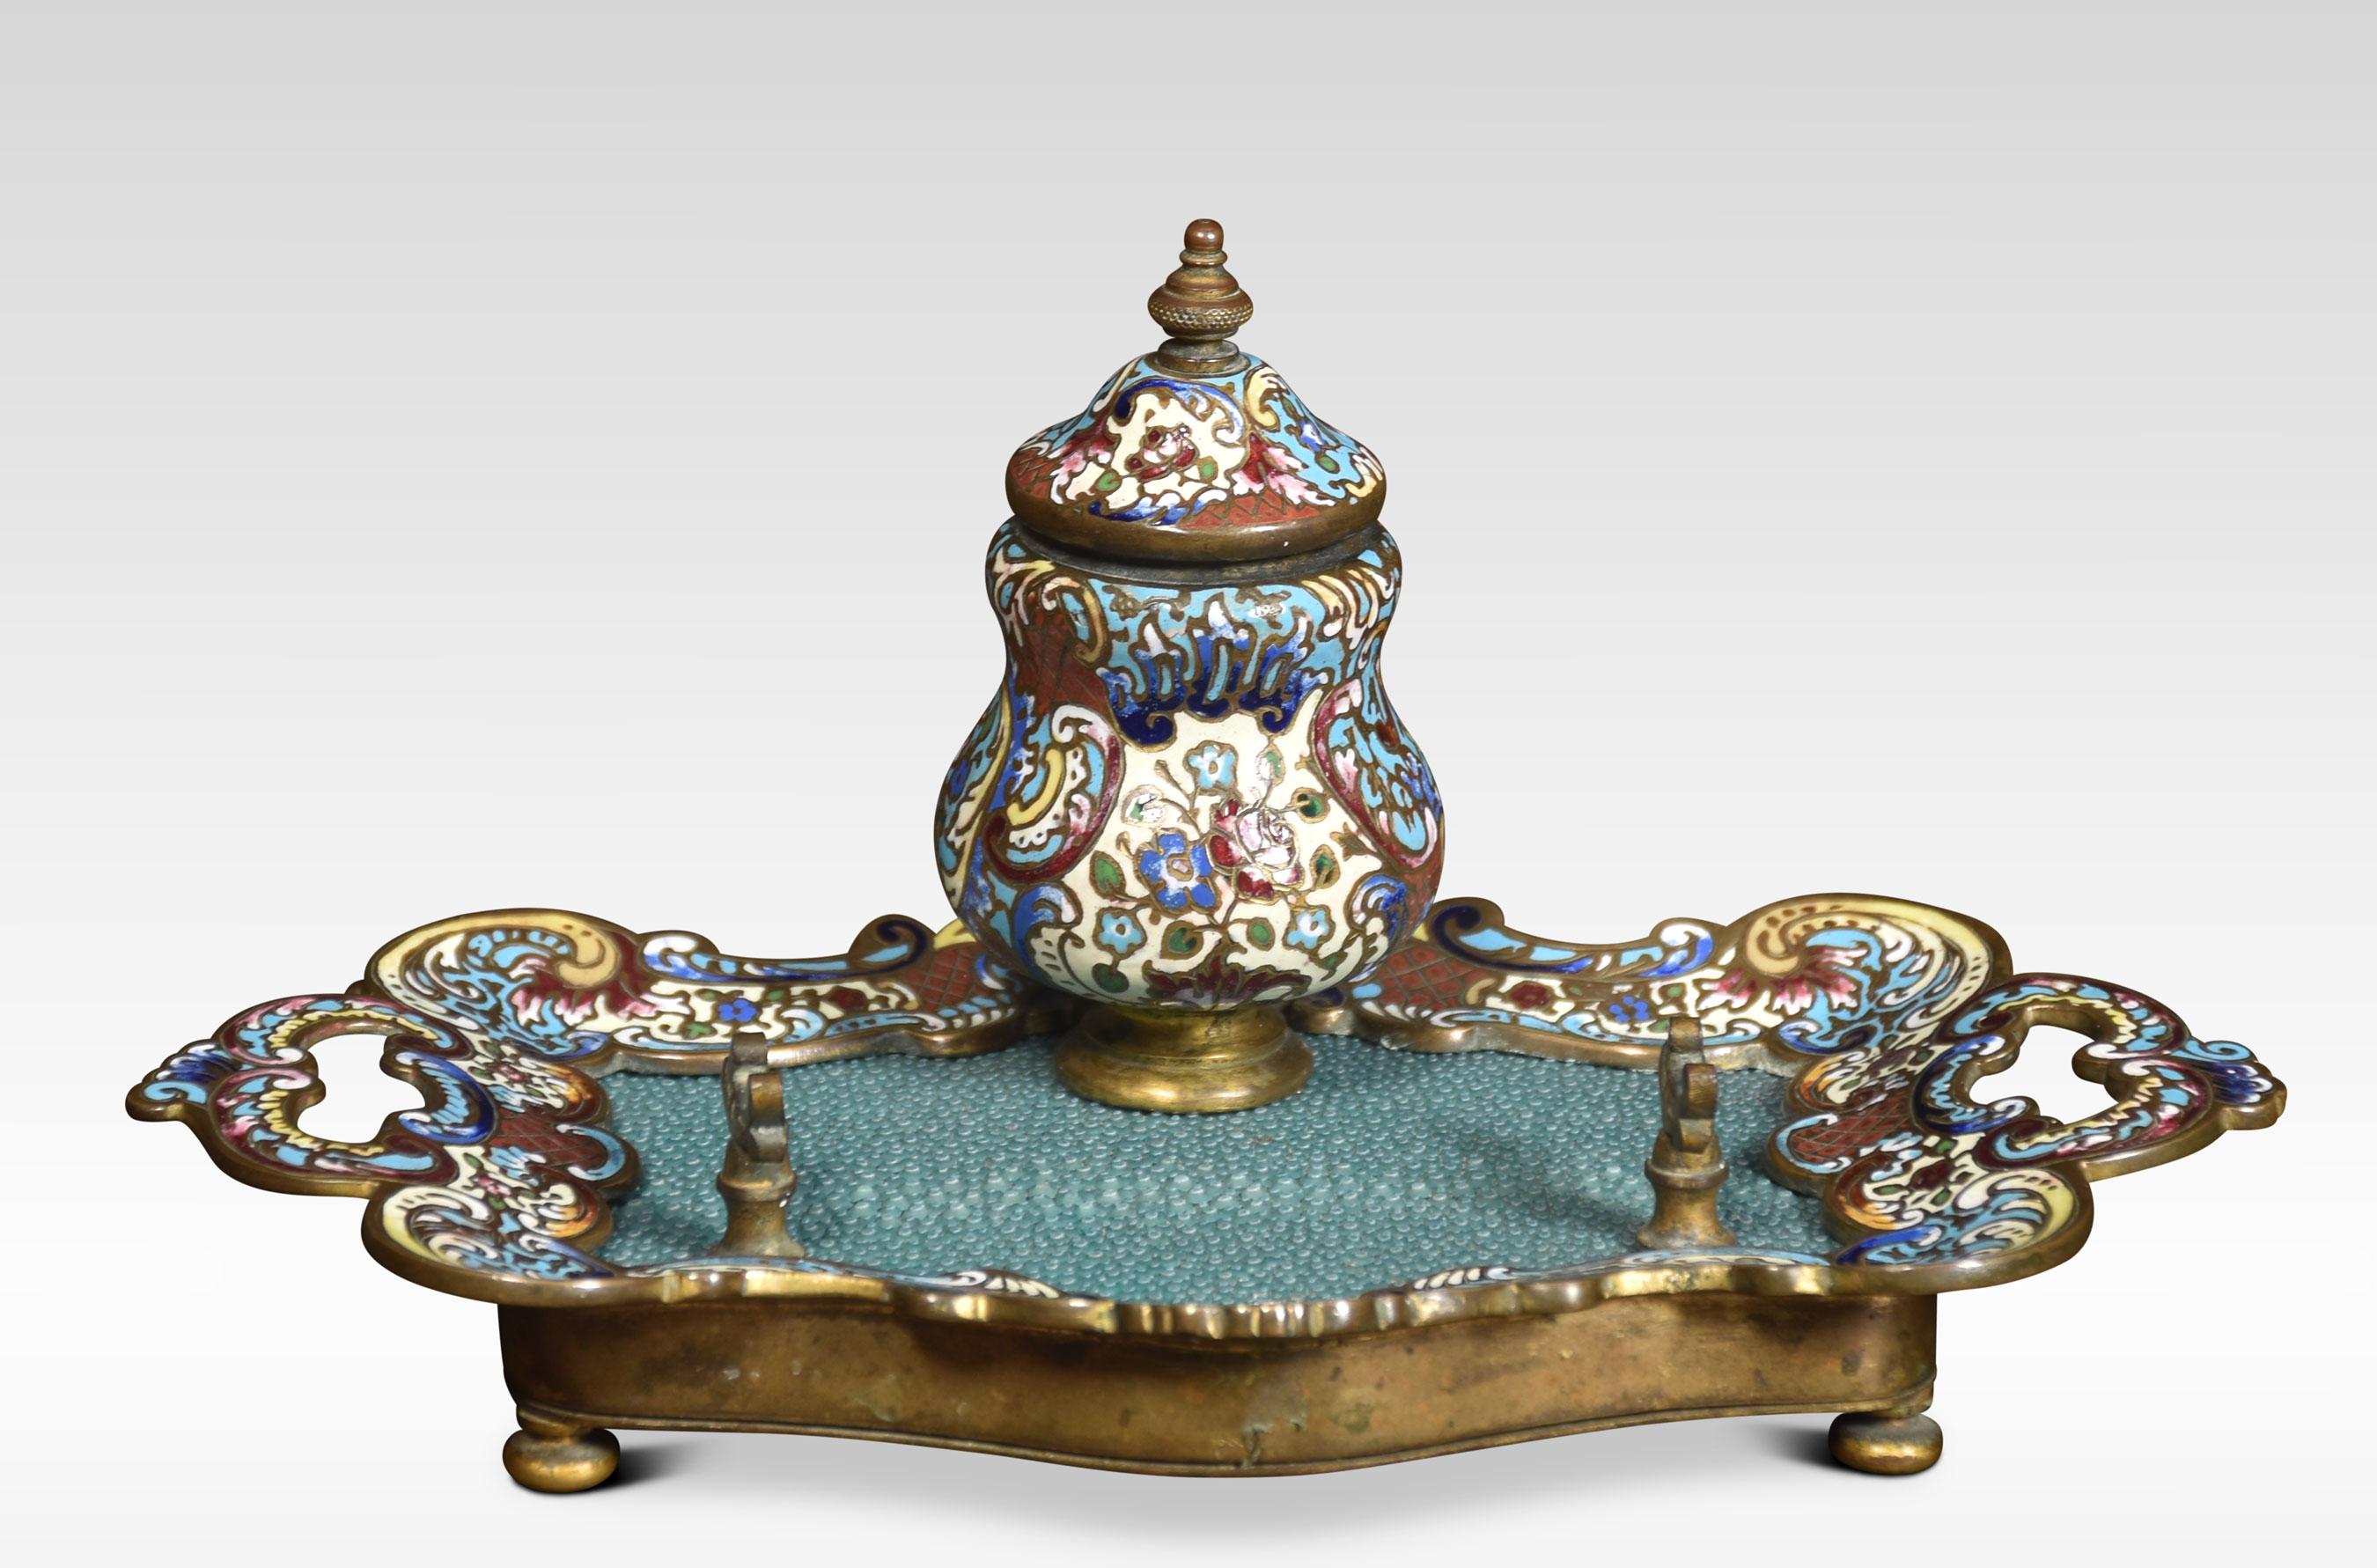 19th Century gilt bronze and champlevé enameled inkstand with single well with hinge cover and pen rest. All raised up on bun feet.
Dimensions
Height 4.5 inches
Width 8.5 inches
Depth 5.5 inches.